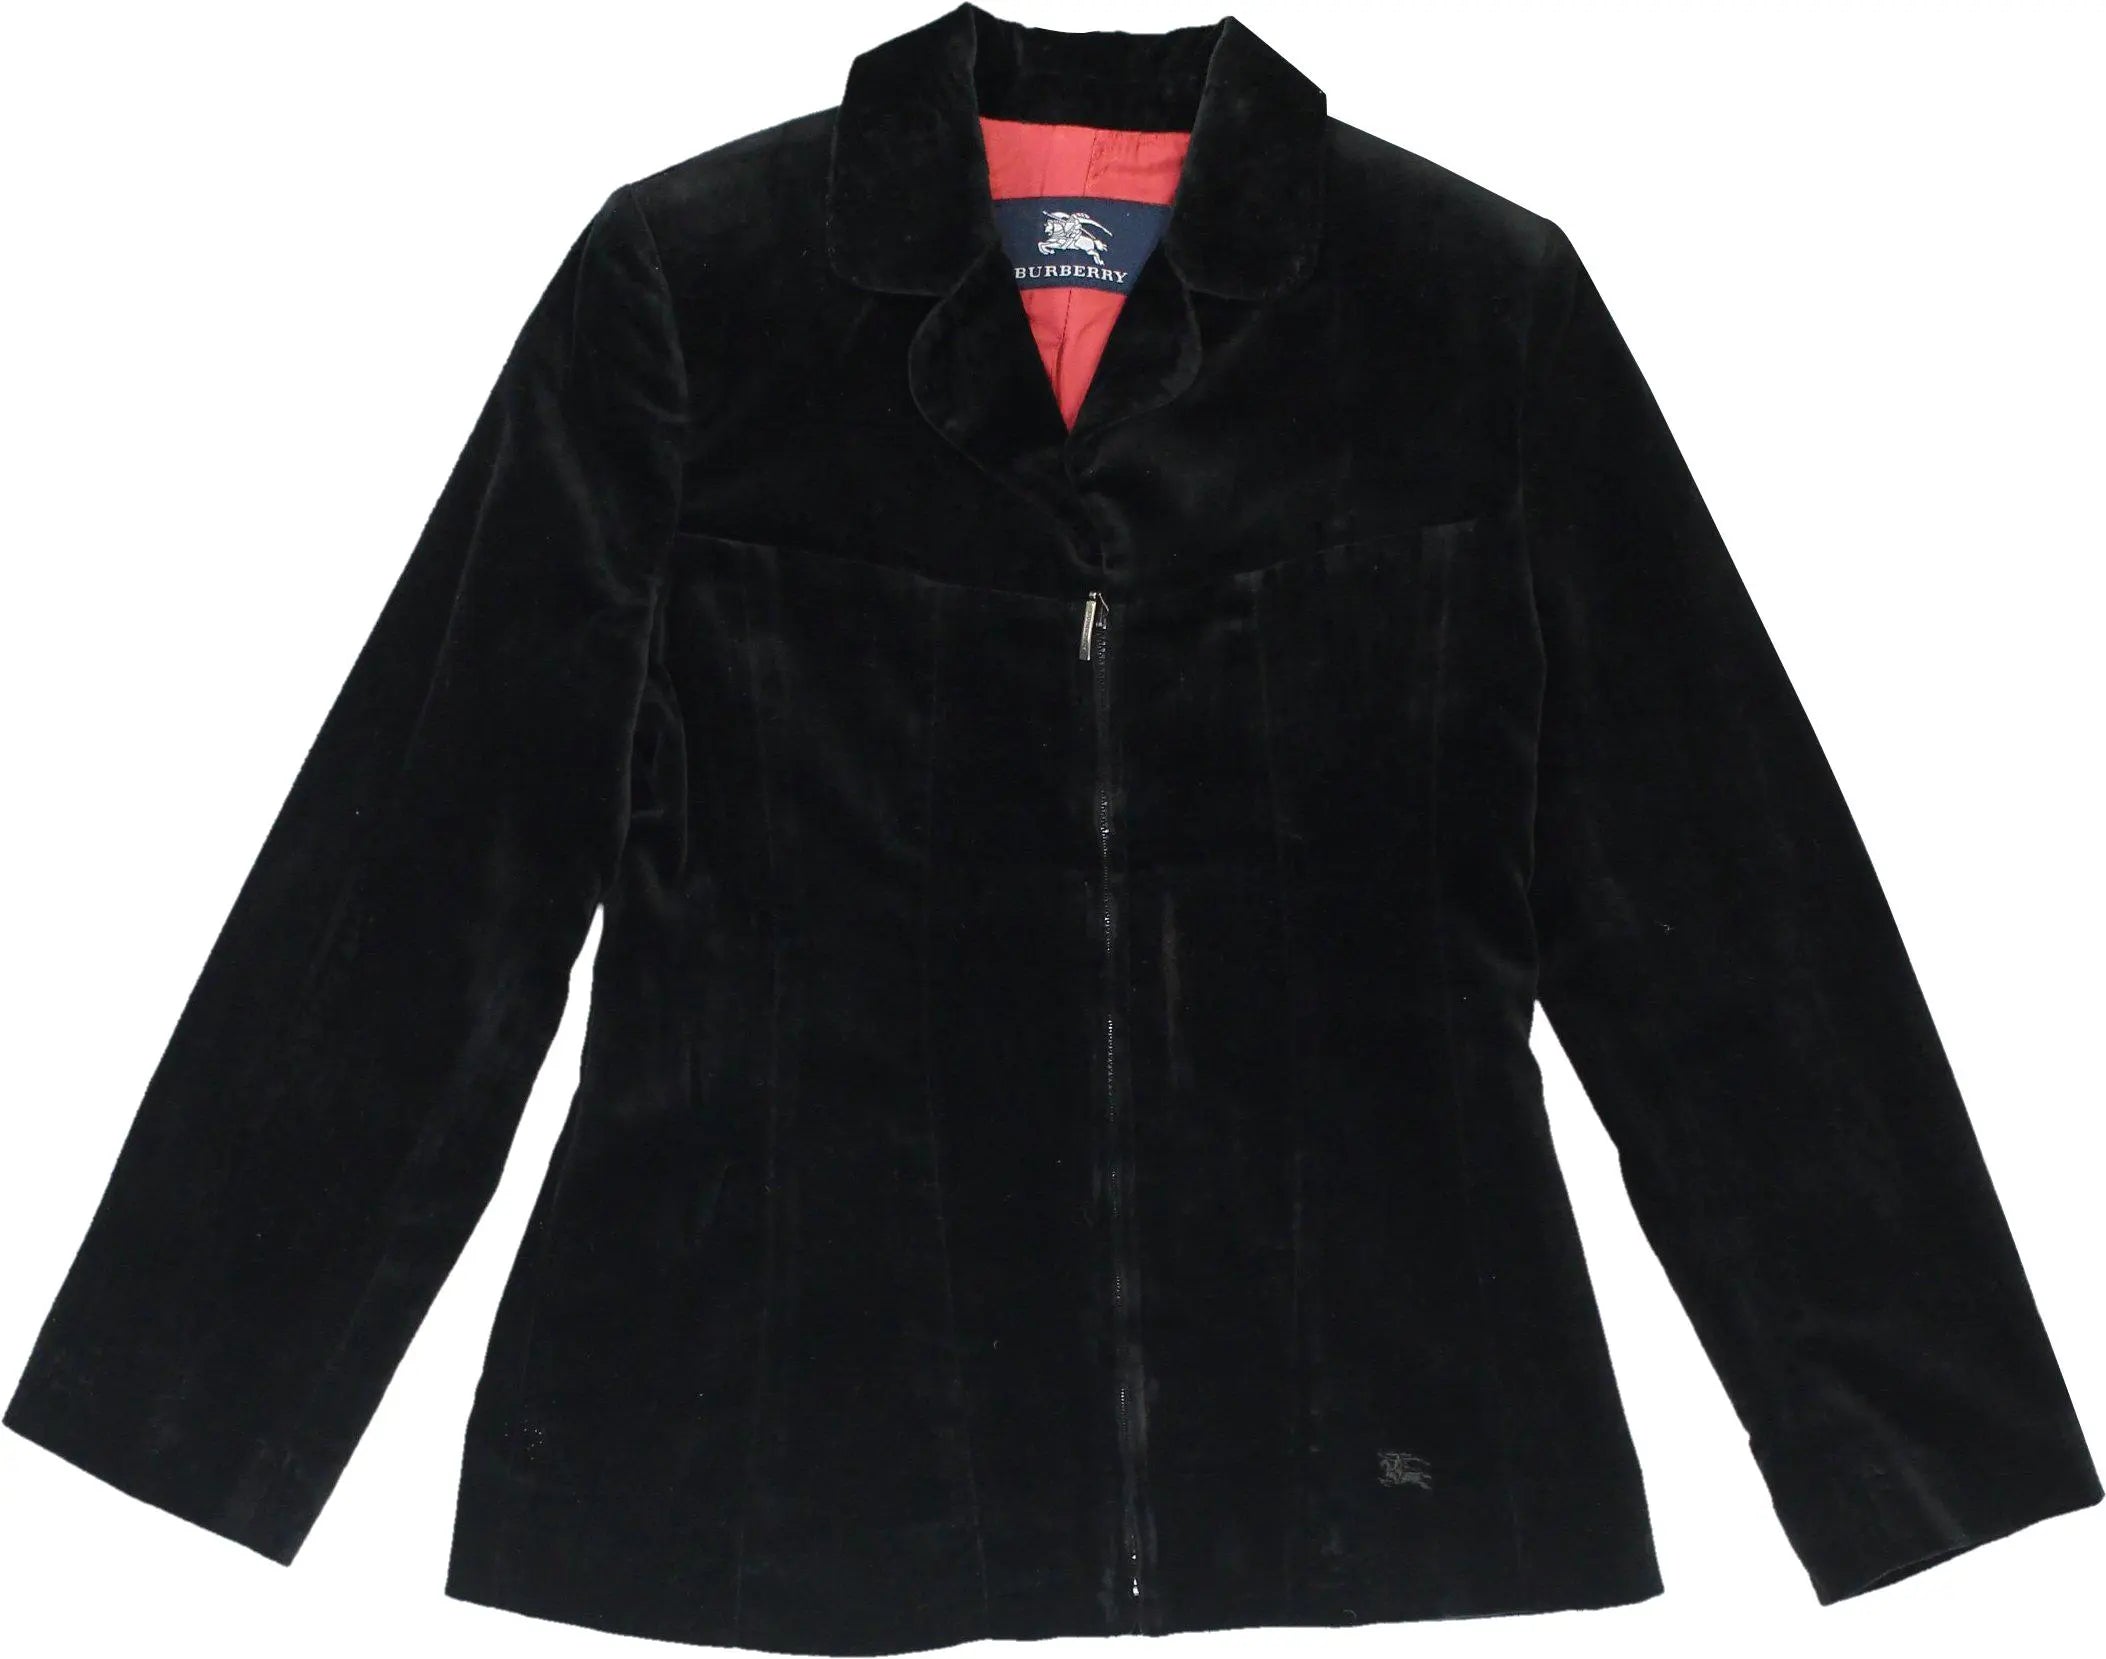 Burberry - Black Velvet Jacket by Burberry- ThriftTale.com - Vintage and second handclothing